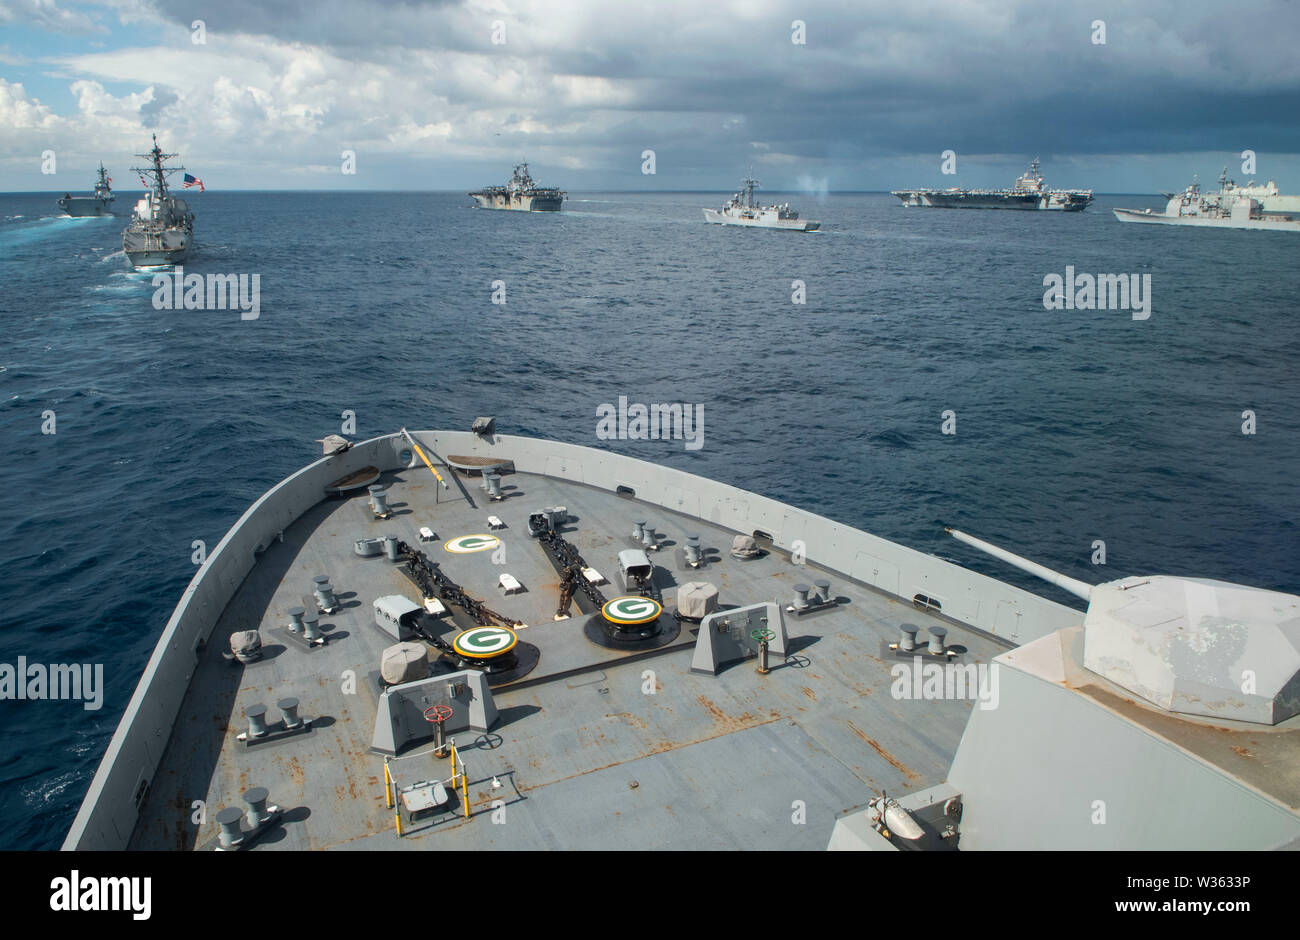 190711-N-DX072-1097 TASMAN SEA (July 11, 2019) The U.S. Navy San Antonio-class amphibious transport dock ship USS Green Bay (LPD 20) takes part in a photo exercise (PHOTOEX) during Talisman Sabre 2019. Green Bay, part of the Wasp Expeditionary Strike Group, with embarked 31st Marine Expeditionary Unit, is currently participating in Talisman Sabre 2019 off the coast of Northern Australia. A bilateral, biennial event, Talisman Sabre is designed to improve U.S. and Australian combat training, readiness and interoperability through realistic, relevant training necessary to maintain regional securi Stock Photo